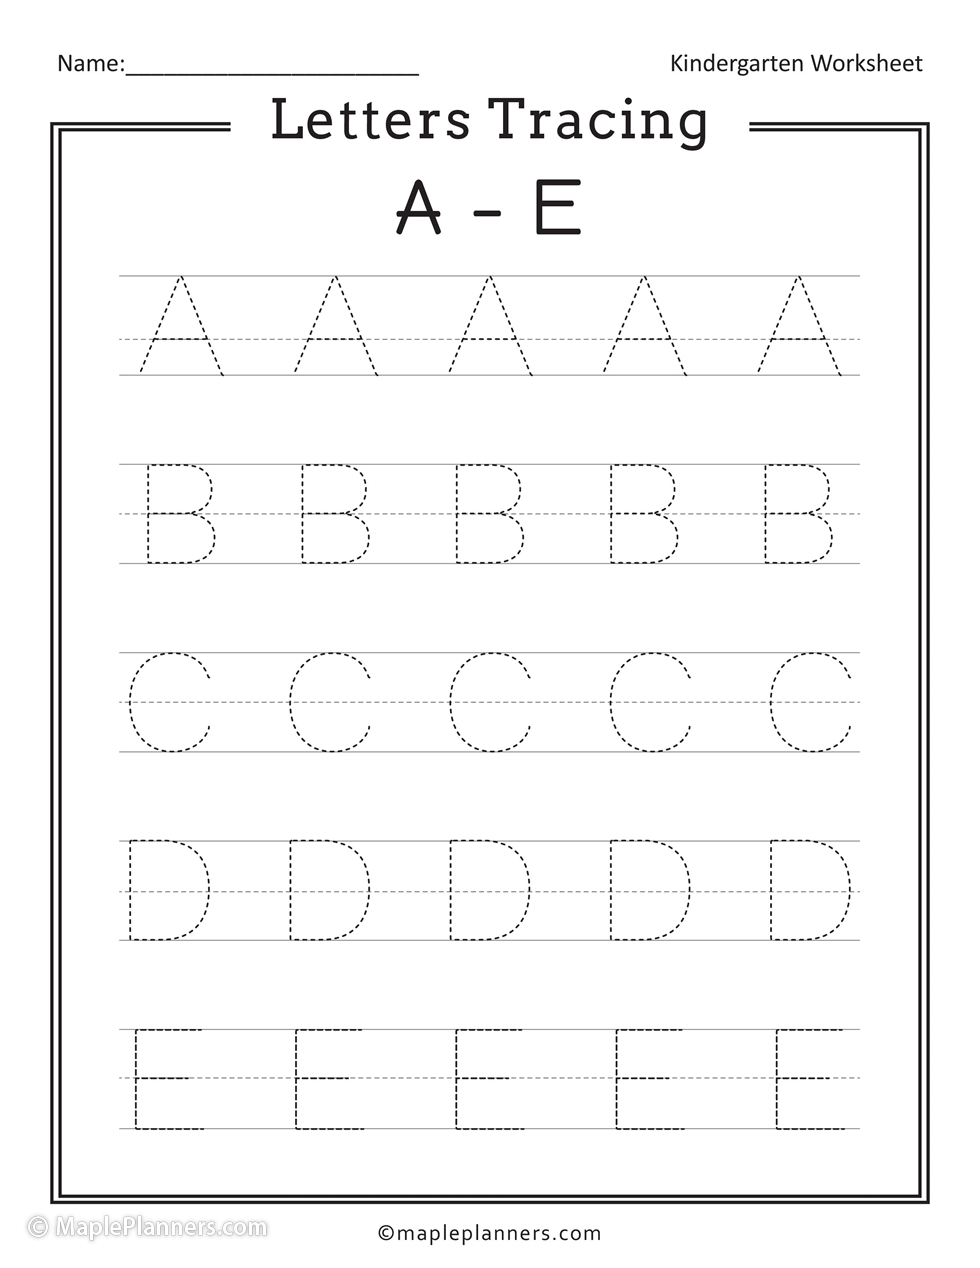 A-E Letters Tracing Worksheets